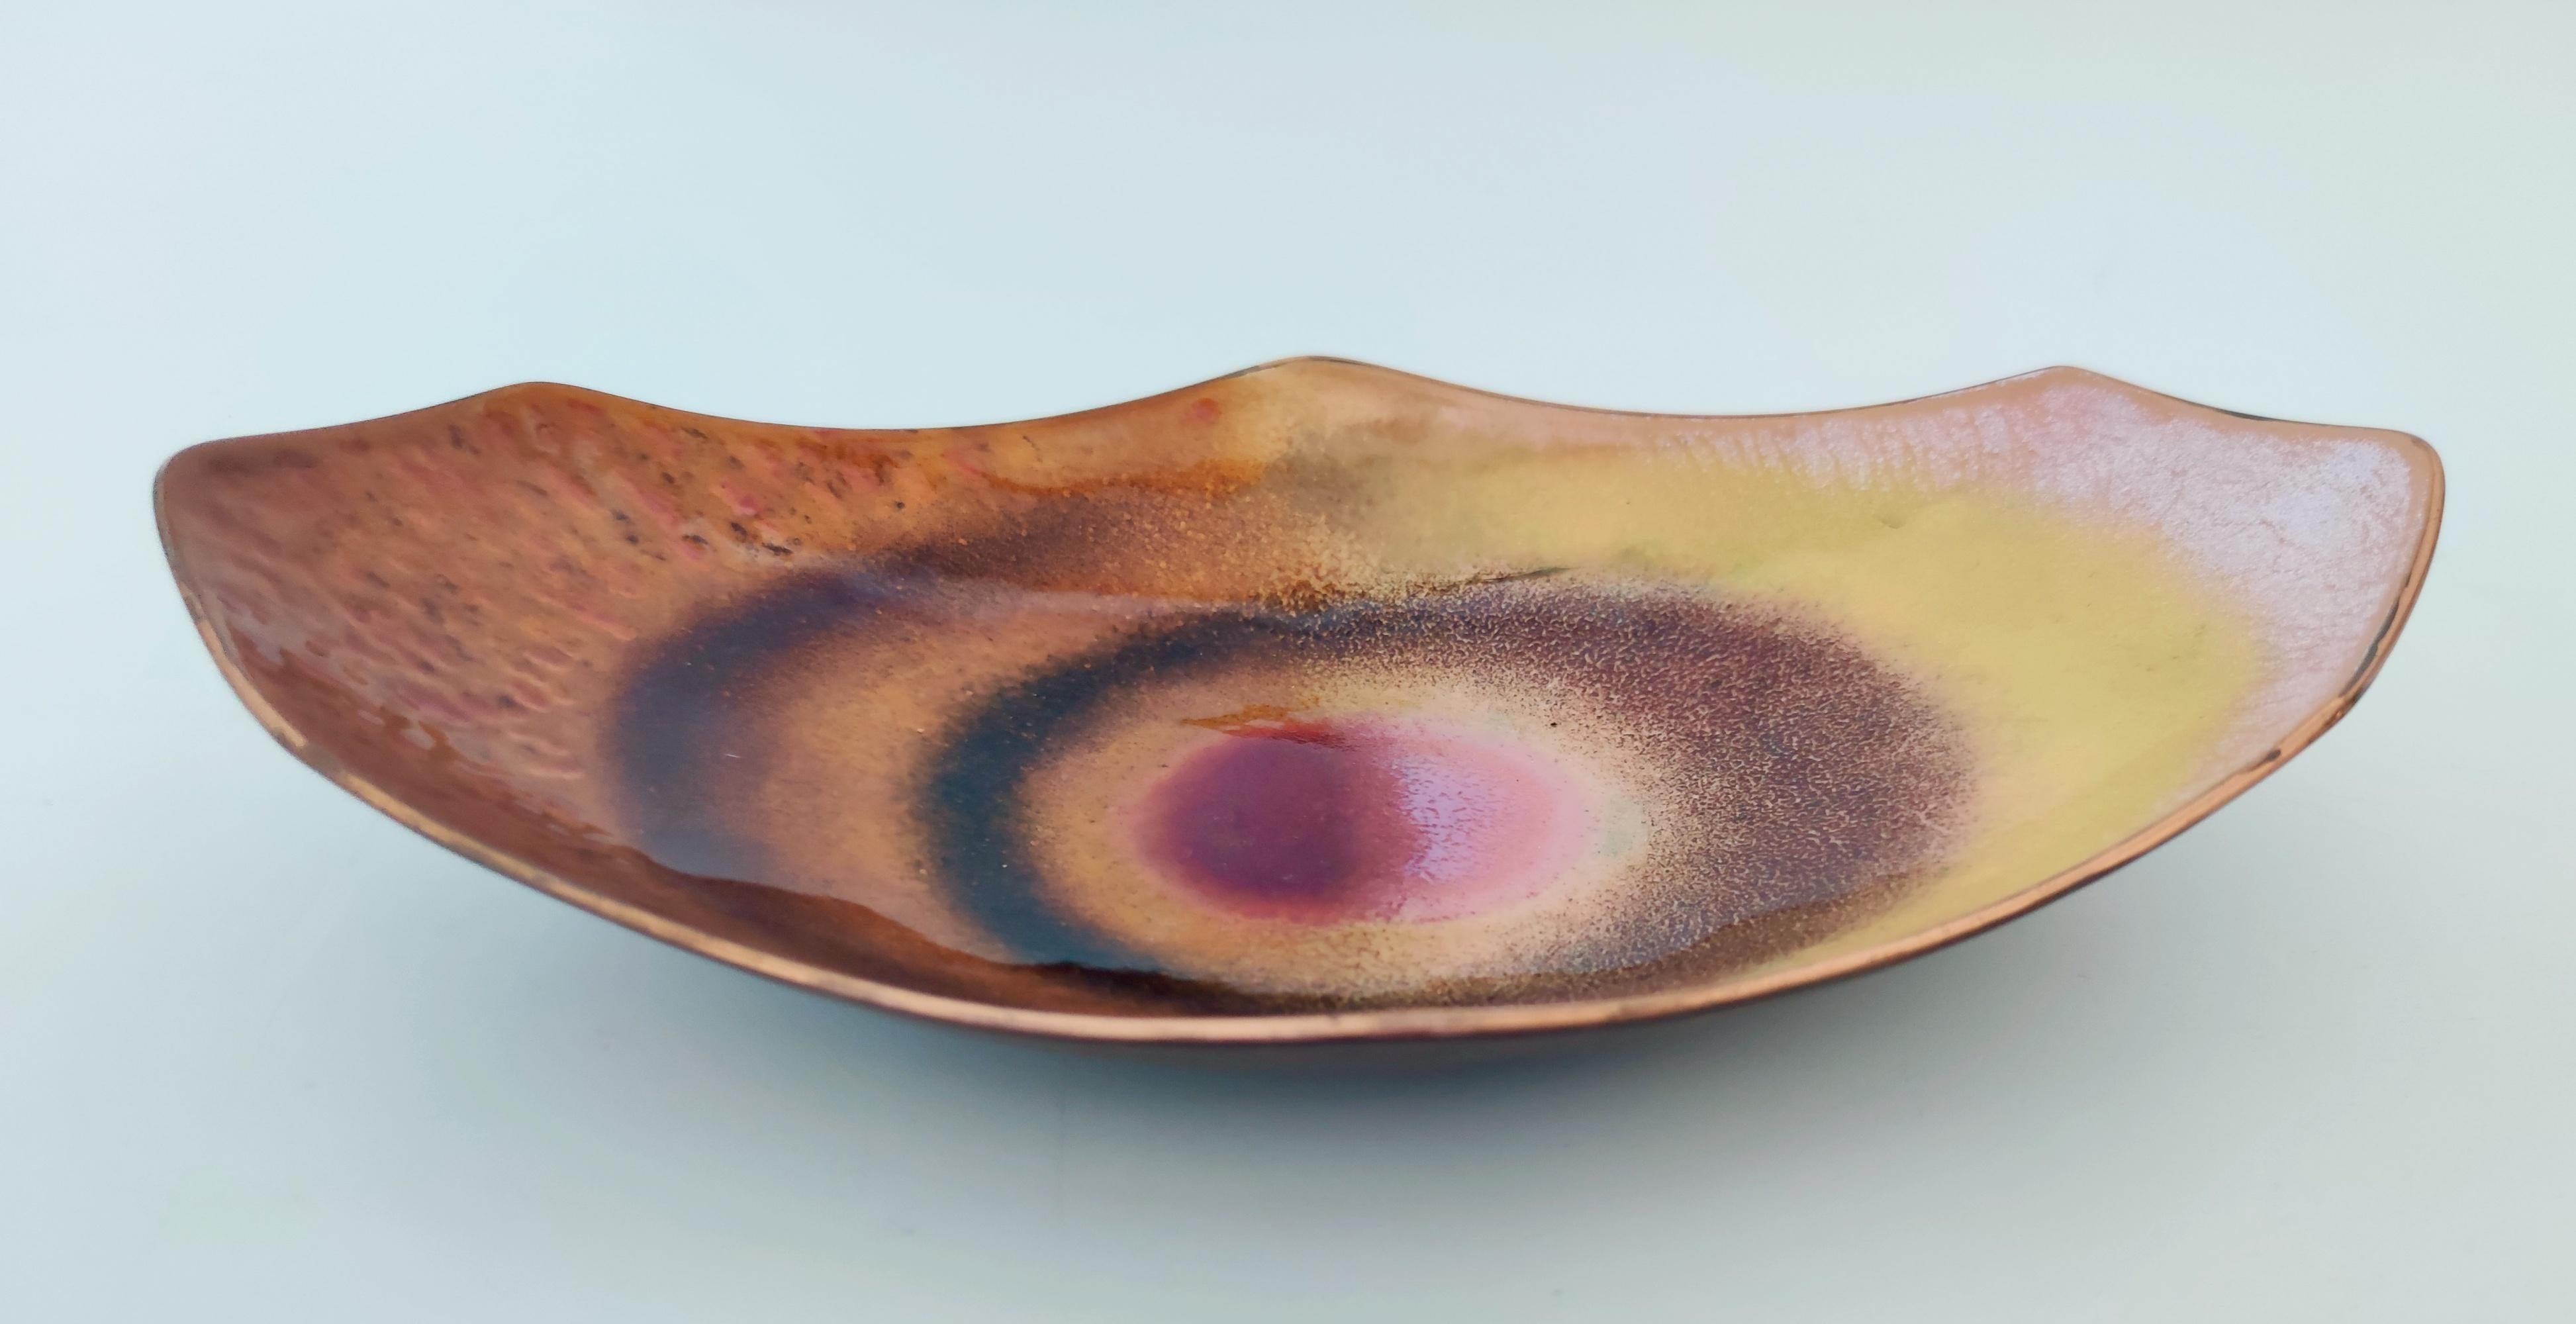 Vintage Enameled Copper Vide-Poche / Decorative Bowl Ascribable to Paolo De Poli In Excellent Condition For Sale In Bresso, Lombardy